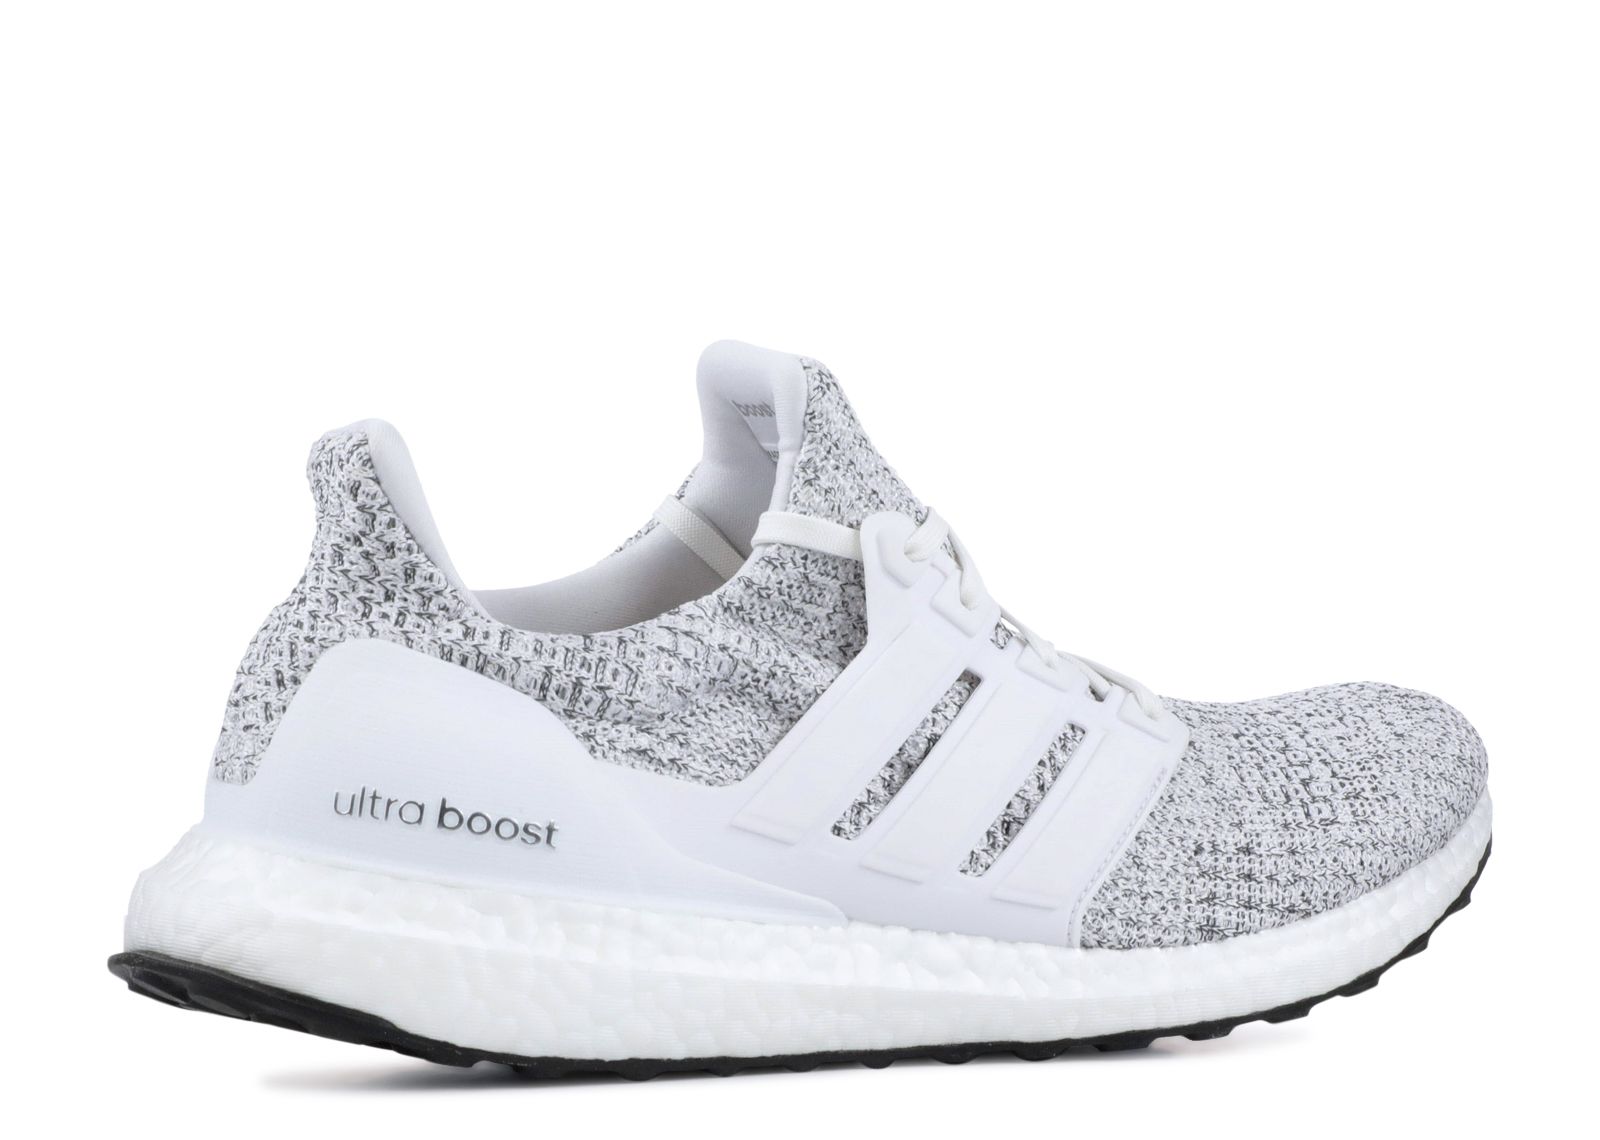 ultra boost neon-dyed/white/grey